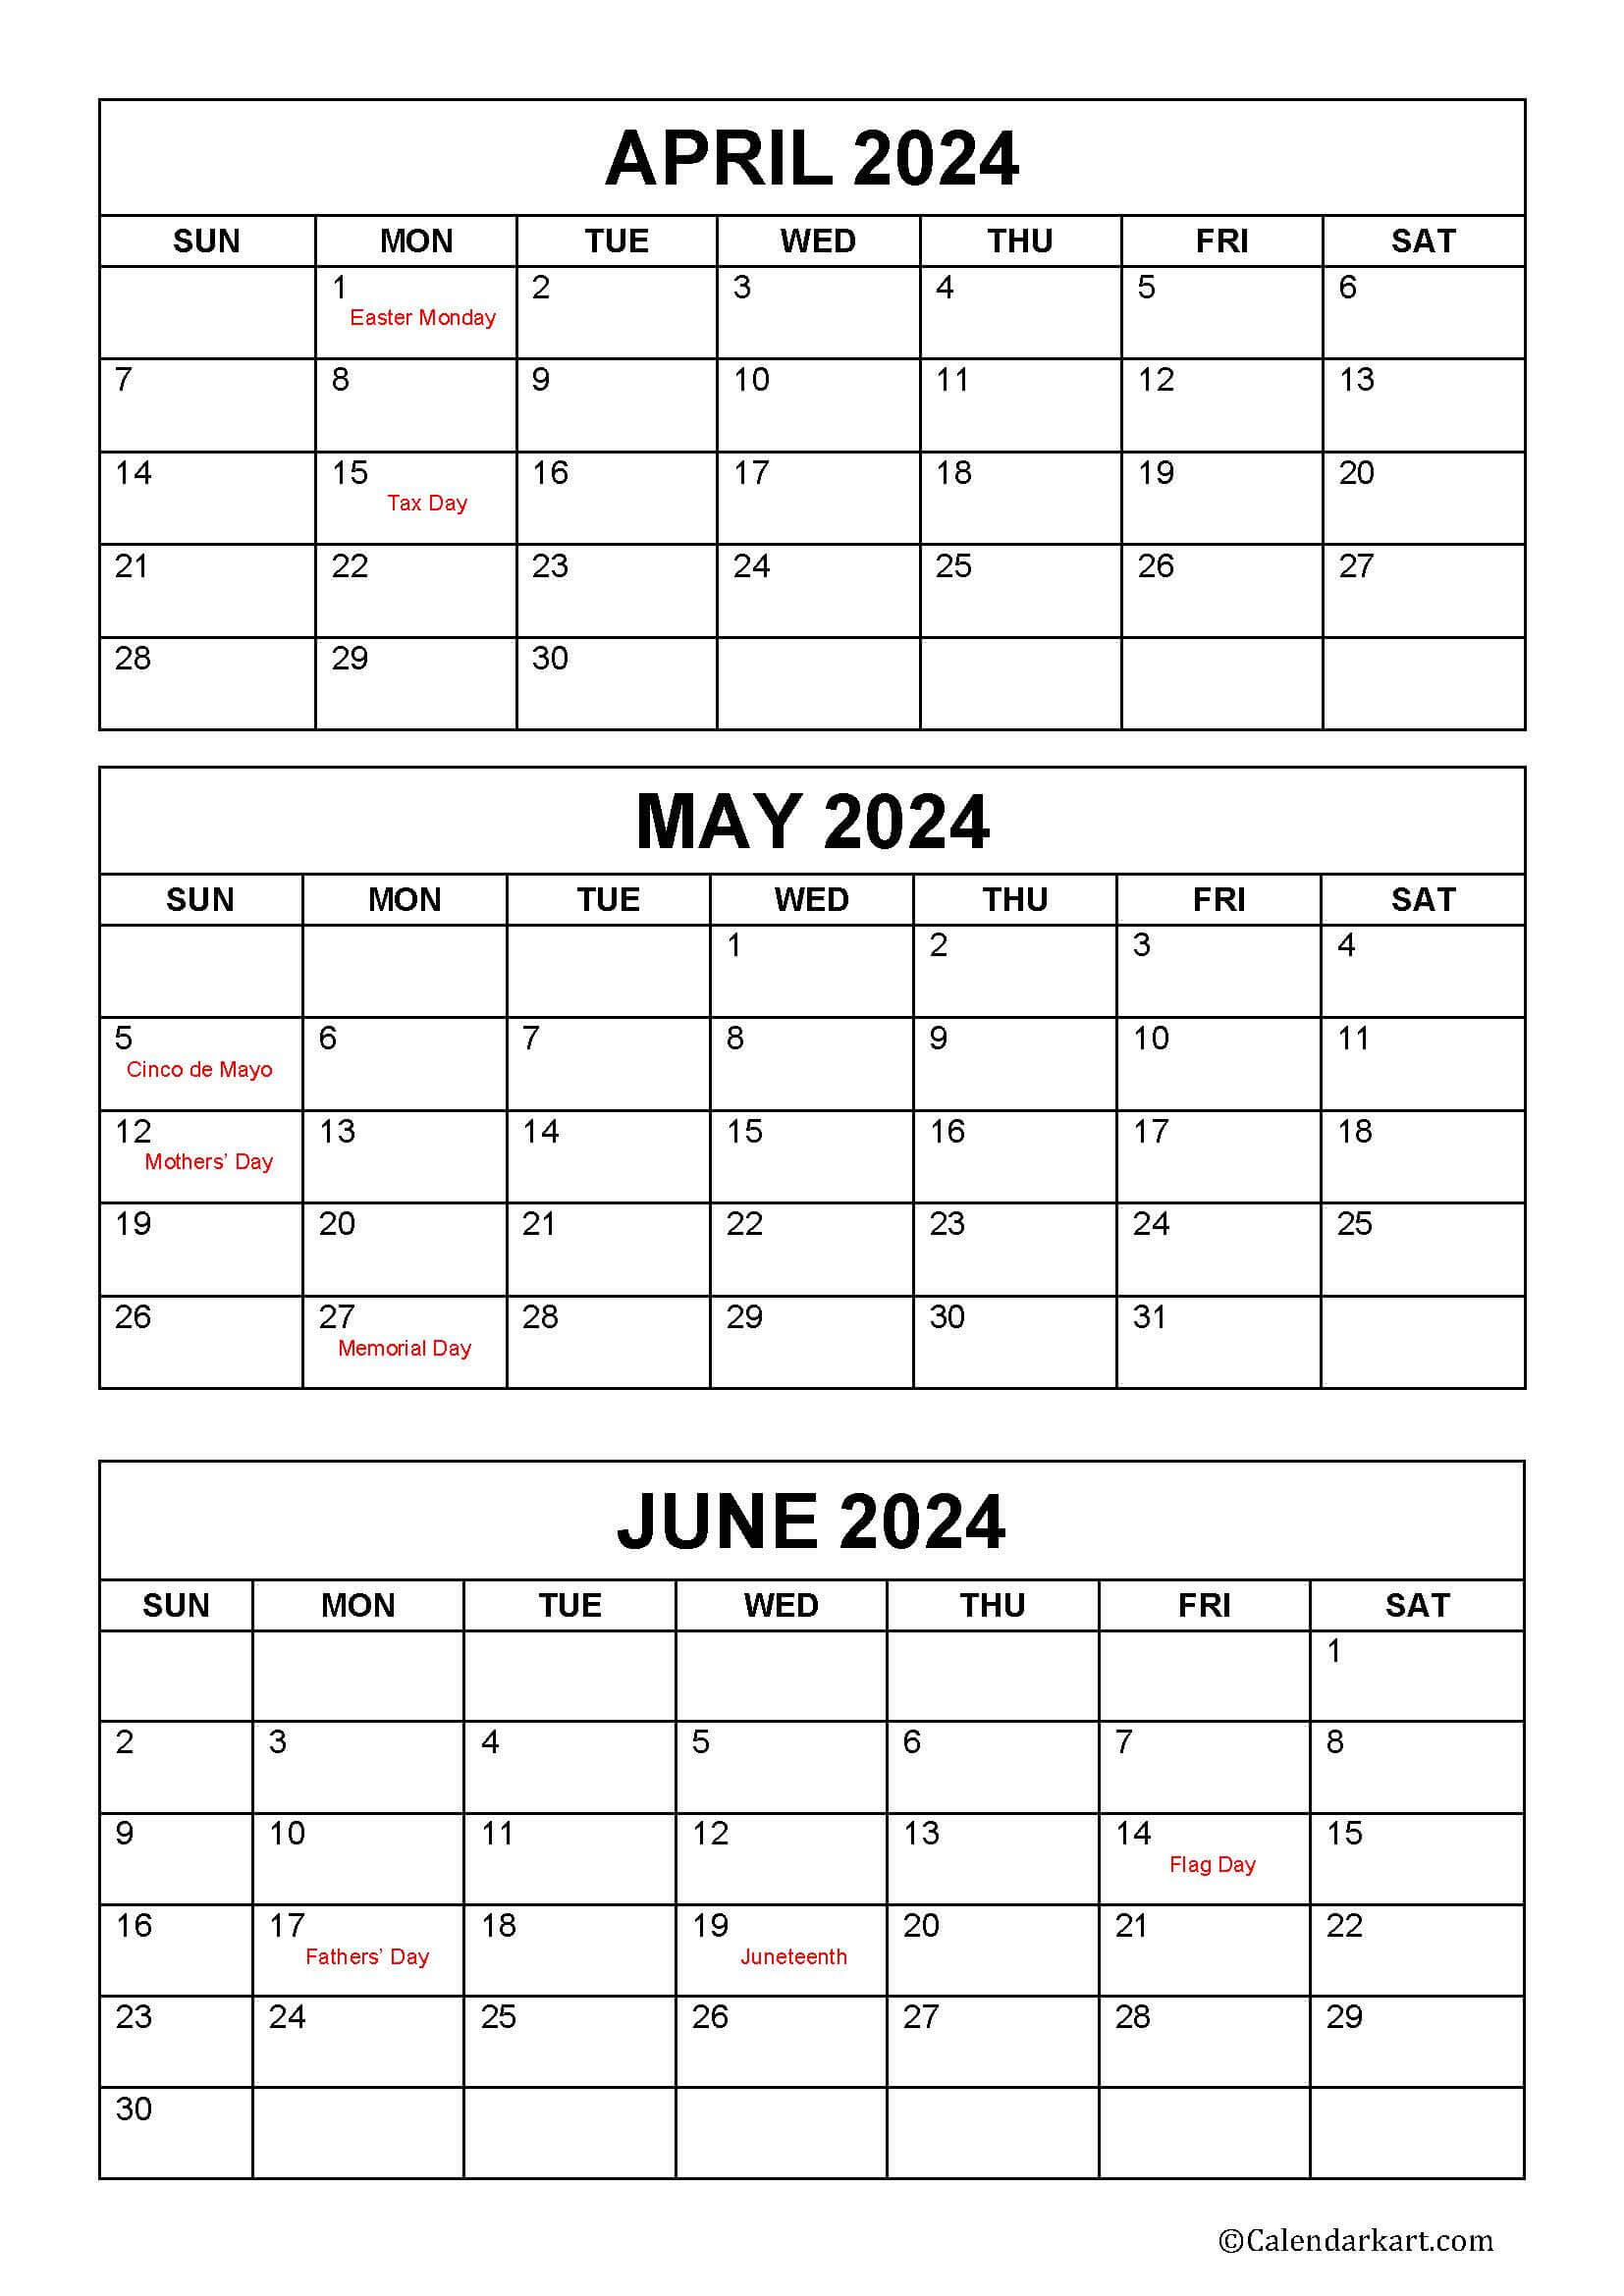 April To June 2024 Calendars (Q2): Free Printables - Calendarkart intended for April May June 2024 Calendar With Holidays